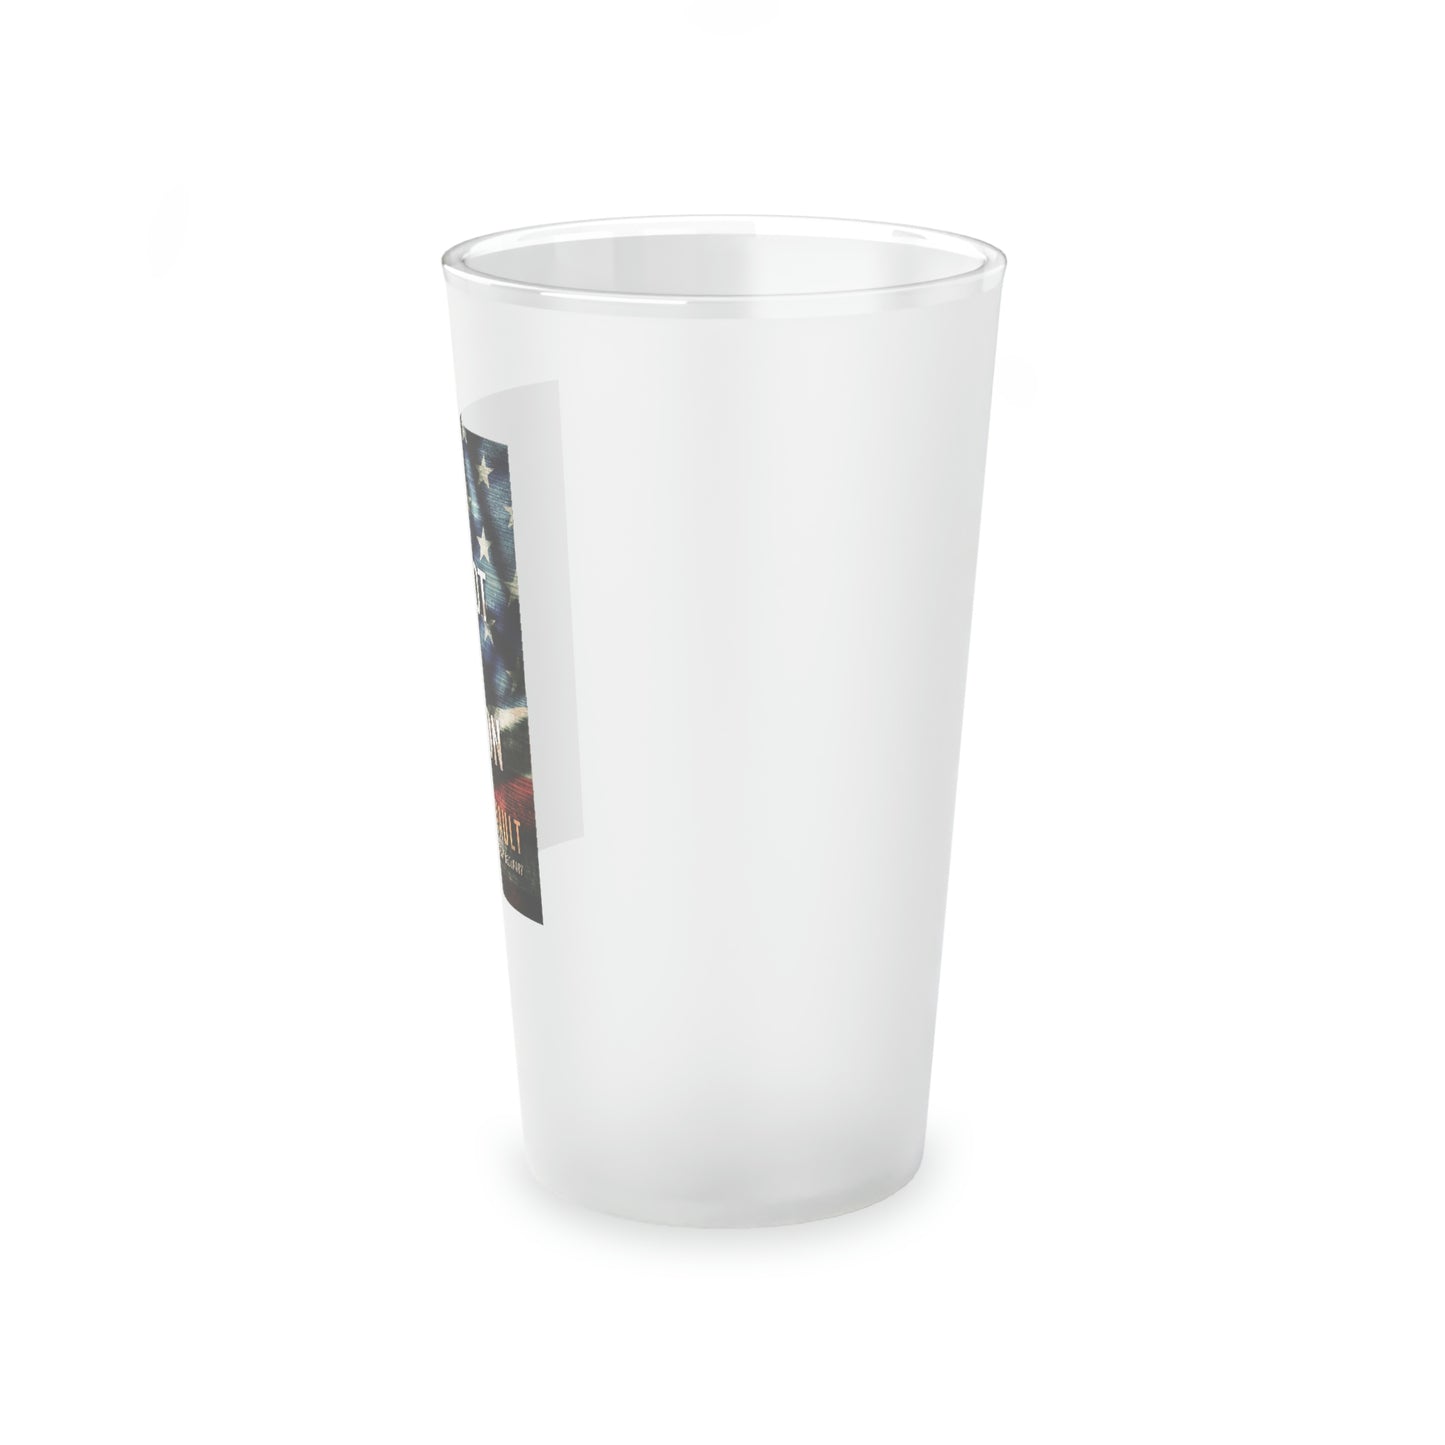 The Patriot Joe Morton - Frosted Pint Glass